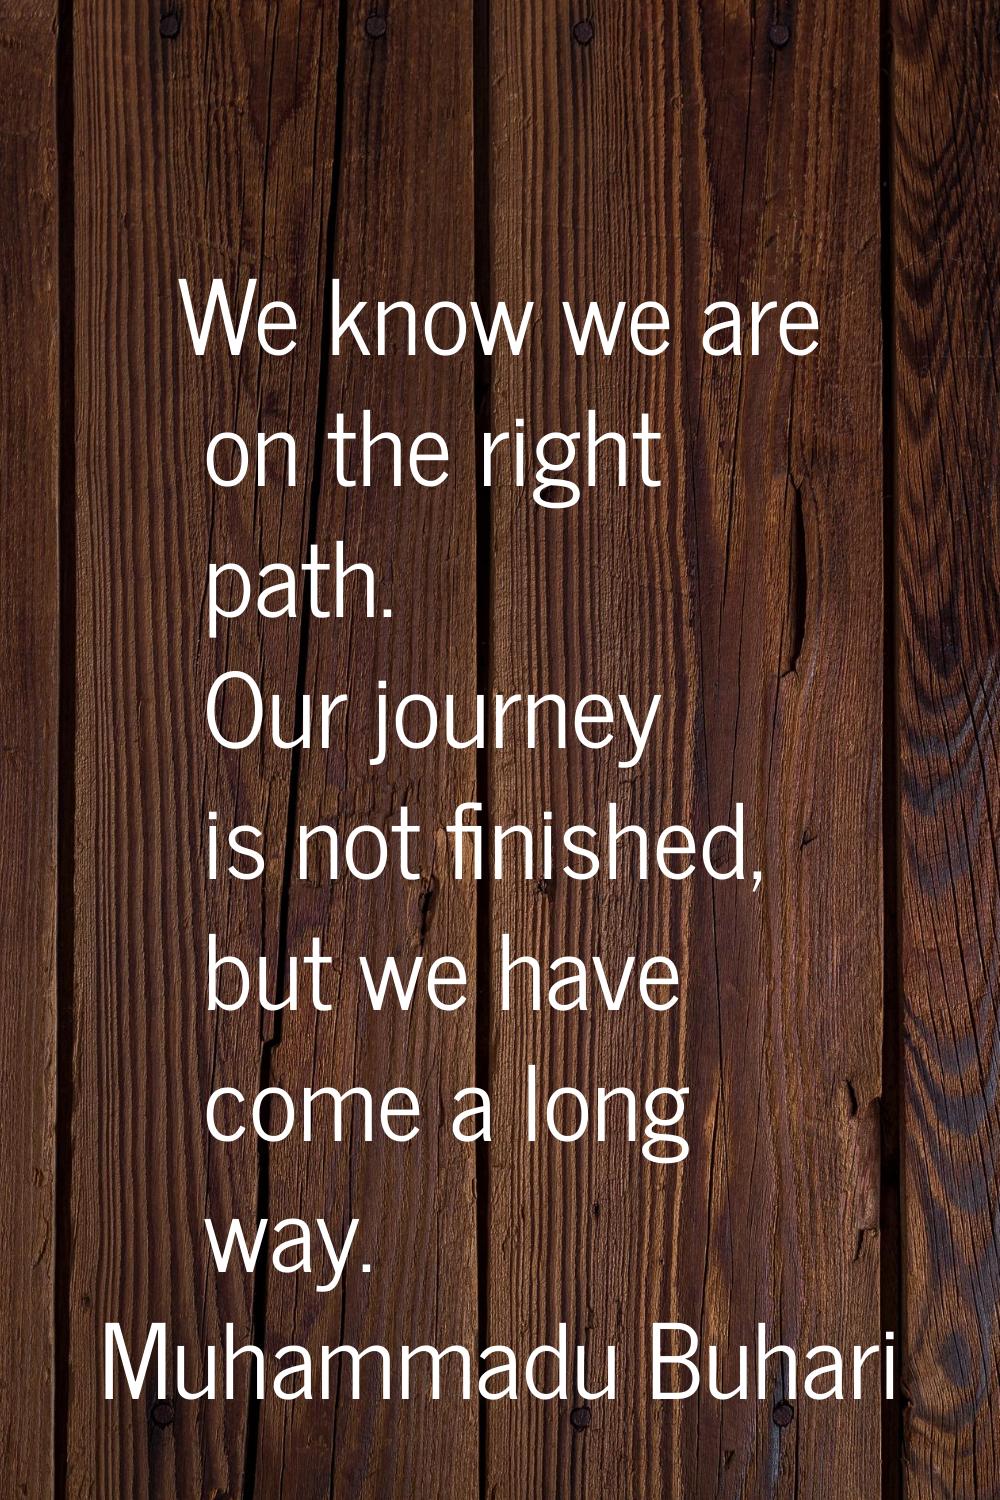 We know we are on the right path. Our journey is not finished, but we have come a long way.